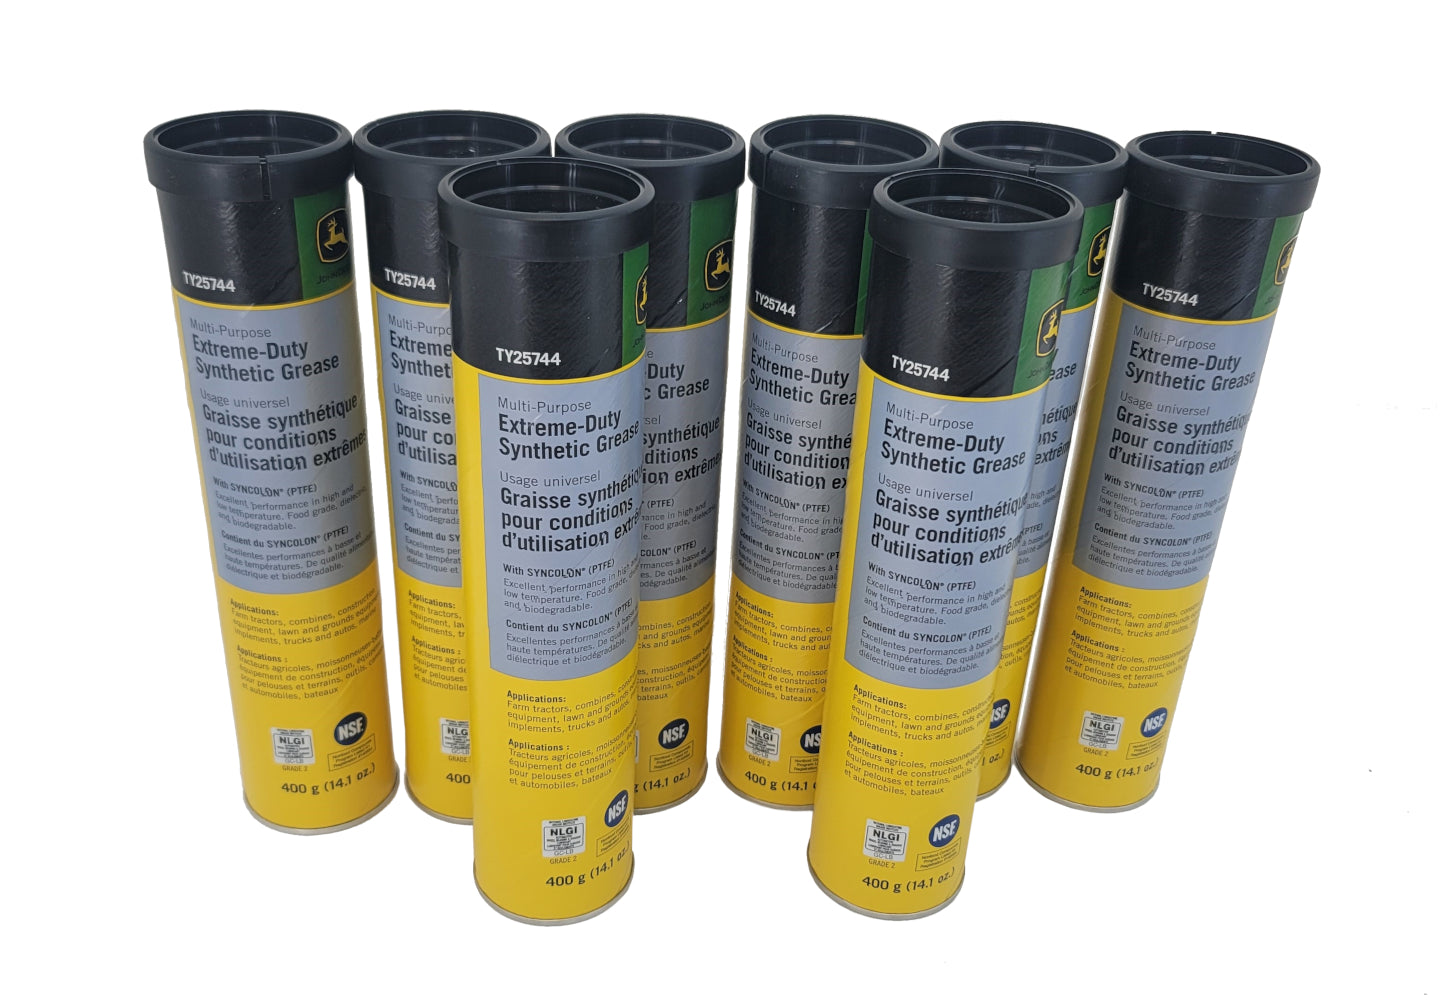 John Deere Original Equipment (8 PACK) Extreme-Duty Synthetic Grease - TY25744